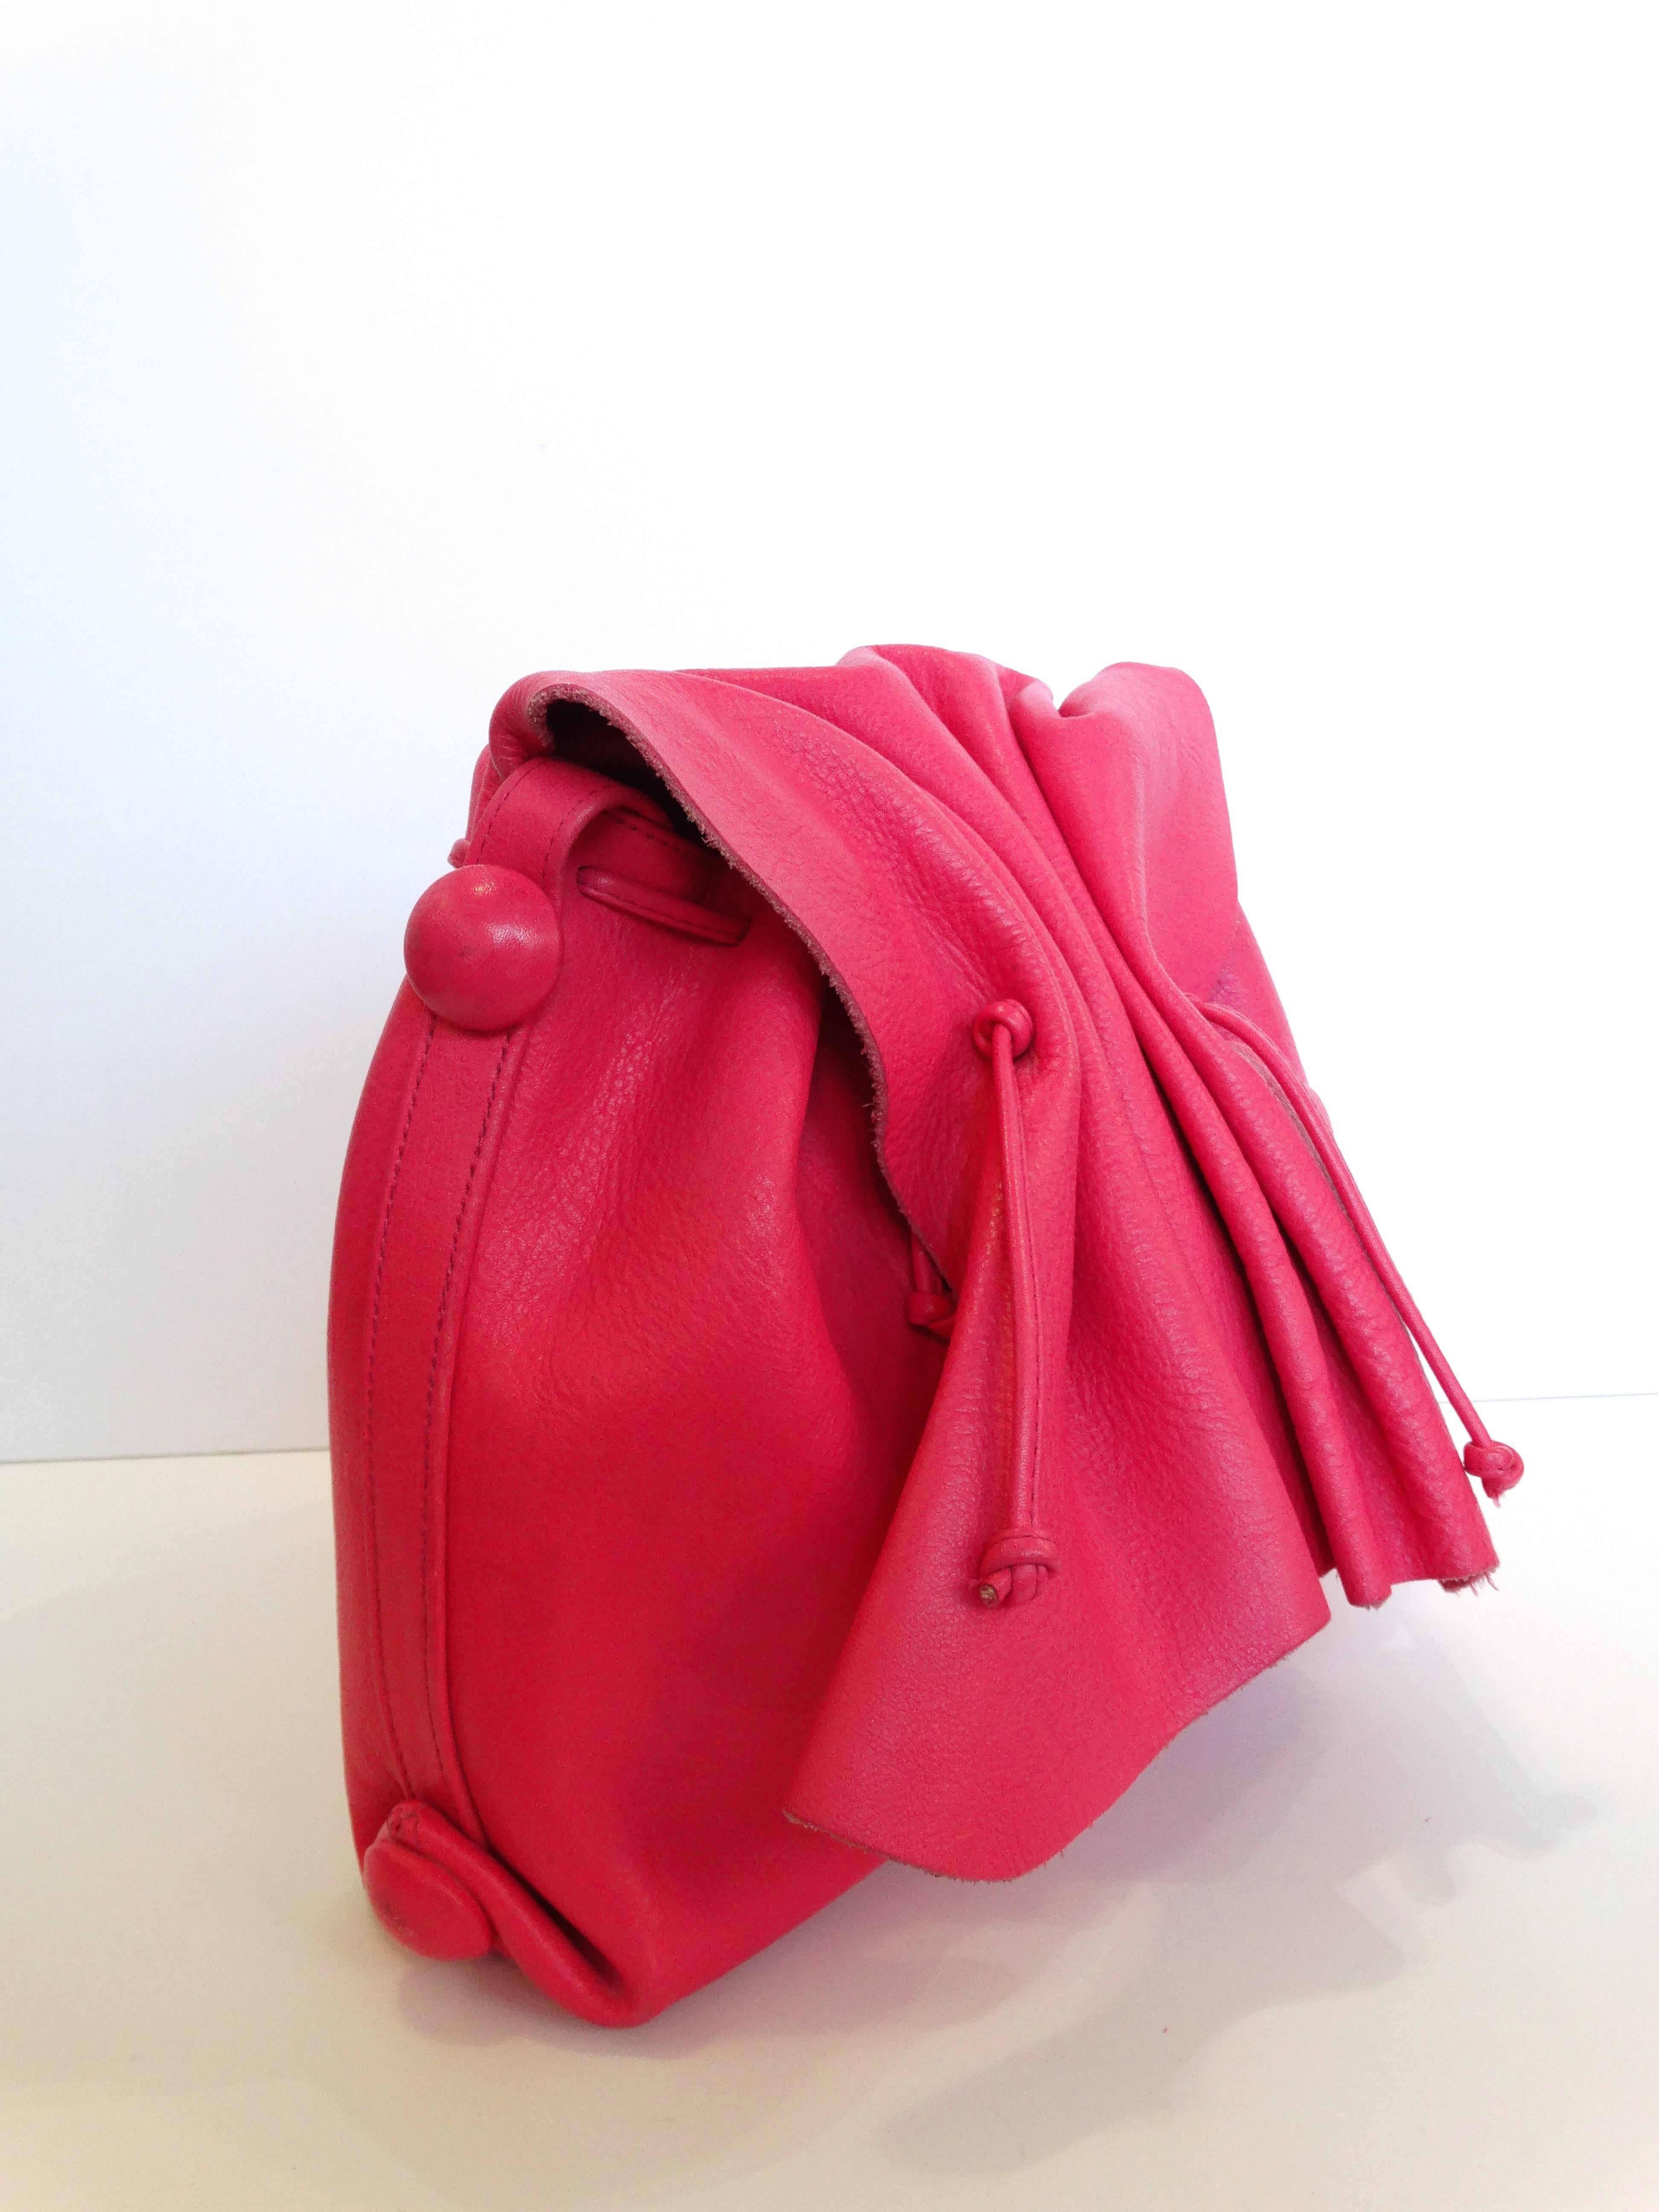 1980s Carlos Falchi cinched flap shoulder bag! 100% leather in a unique bubblegum pink color. Flap closes with magnet. Features a drawstring closure on the interior beneath the flap. Zipper pouch in the interior. Shoulder strap drops 18 inches 